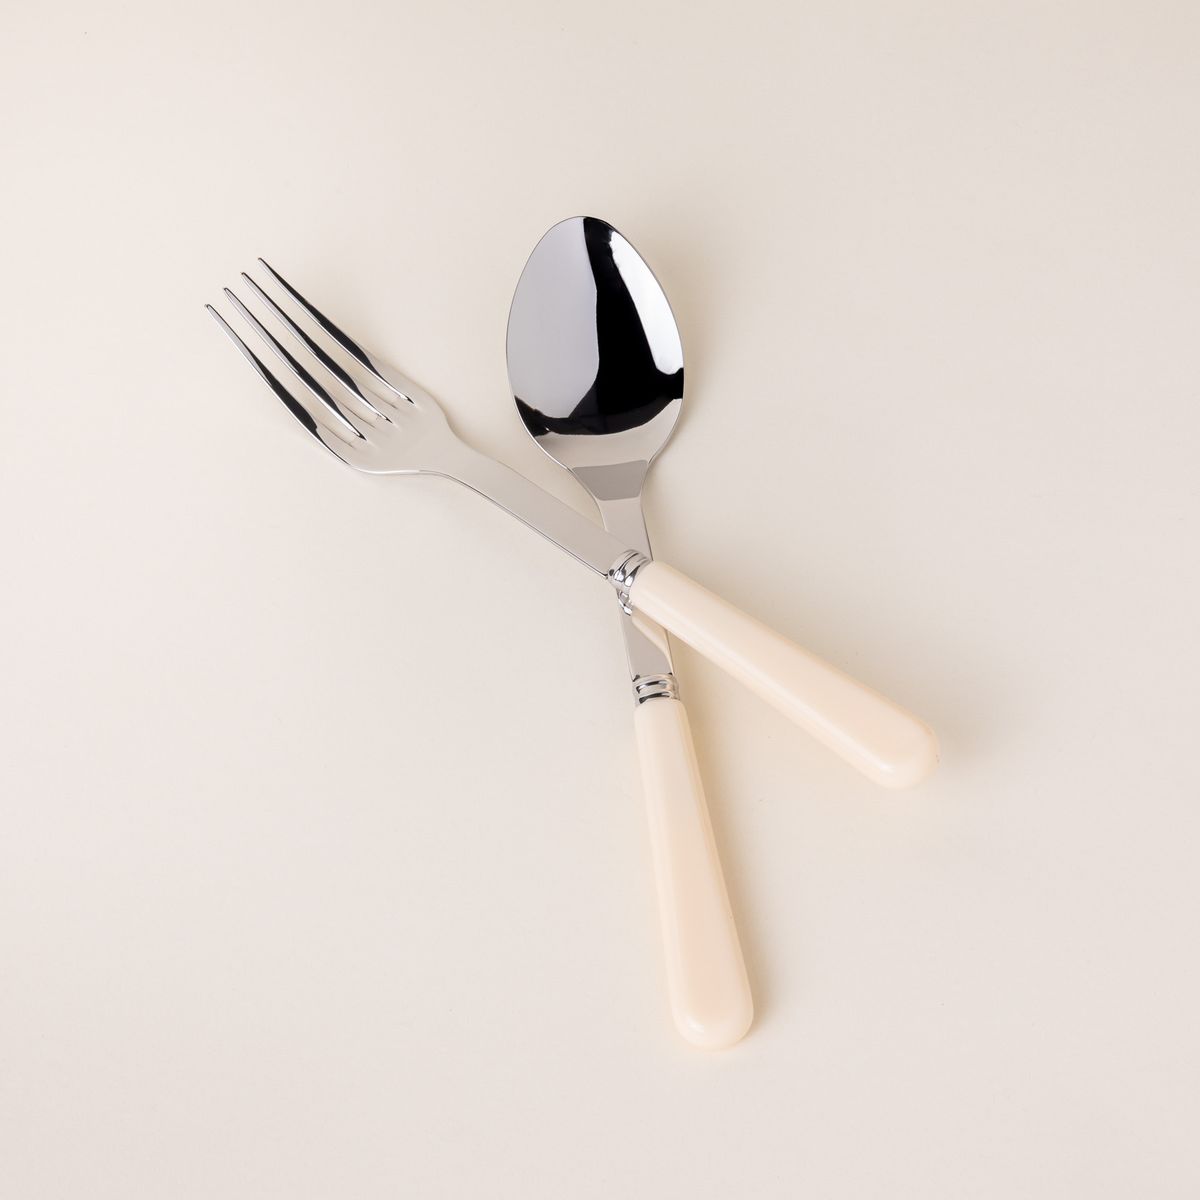 A serving size spoon and fork in a shiny steel with a matte cream handle